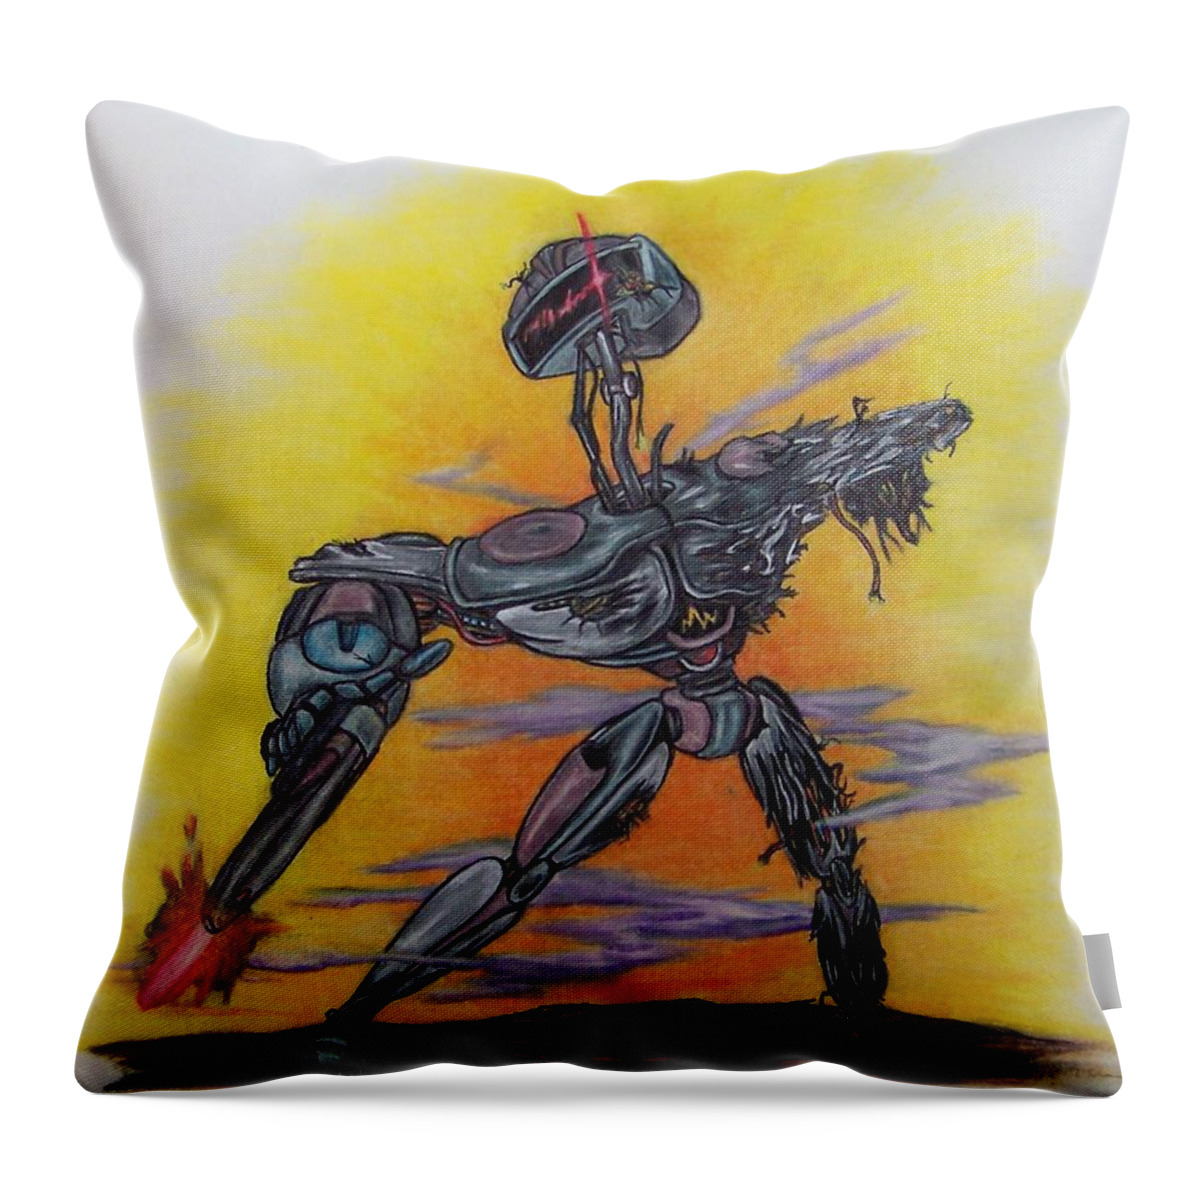 Michael Throw Pillow featuring the drawing Last Resort by Michael TMAD Finney